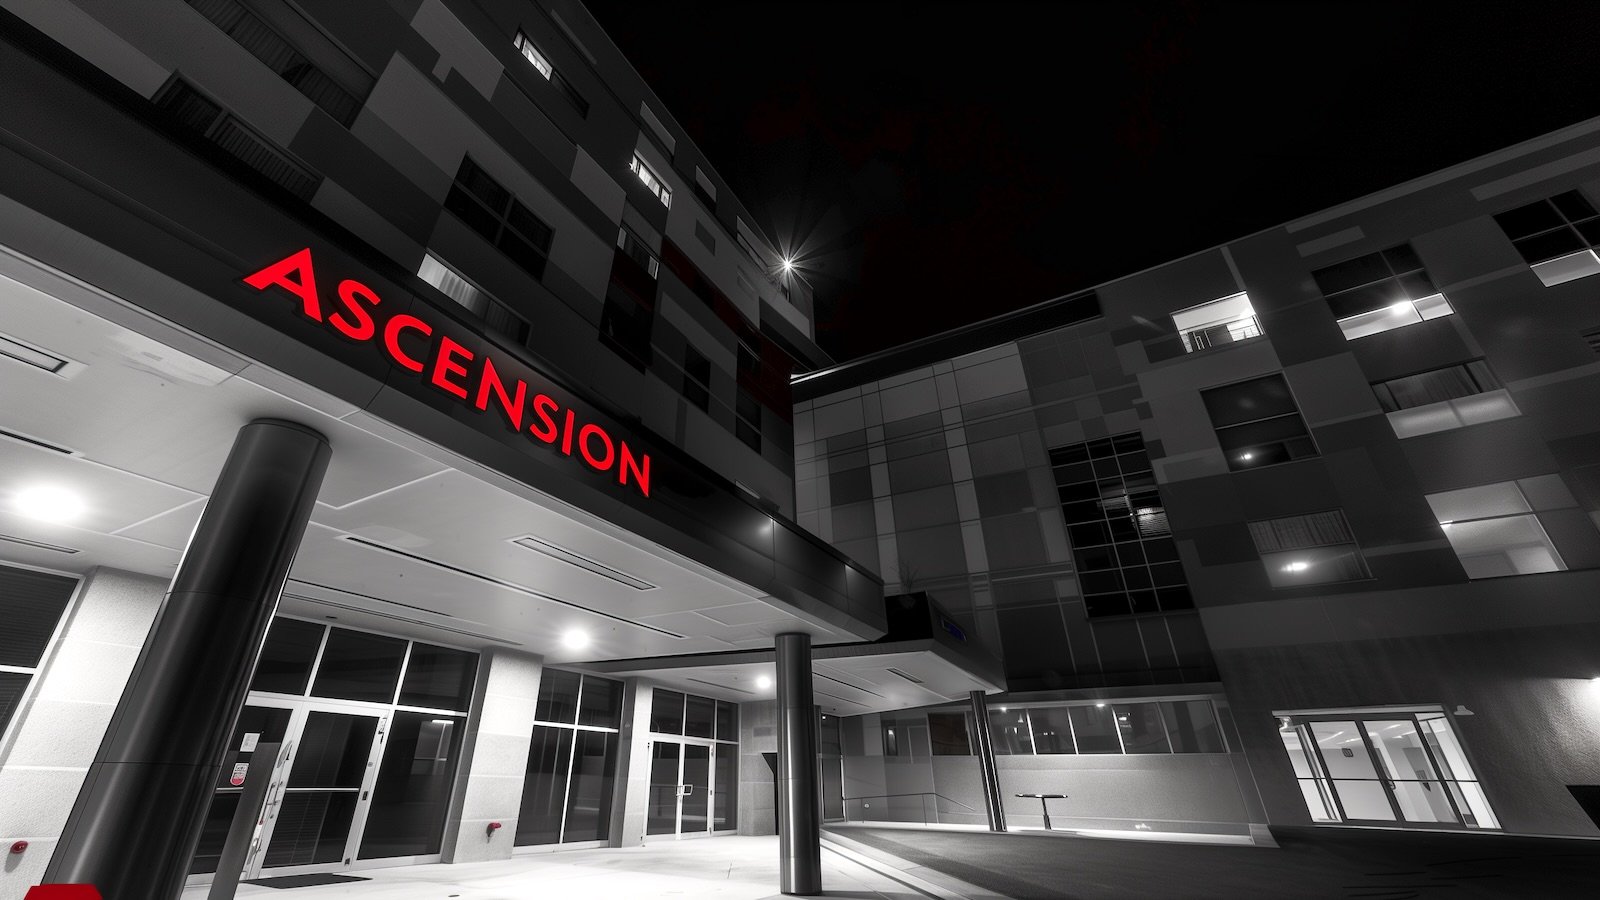 Ascension redirects ambulances after suspected ransomware attack